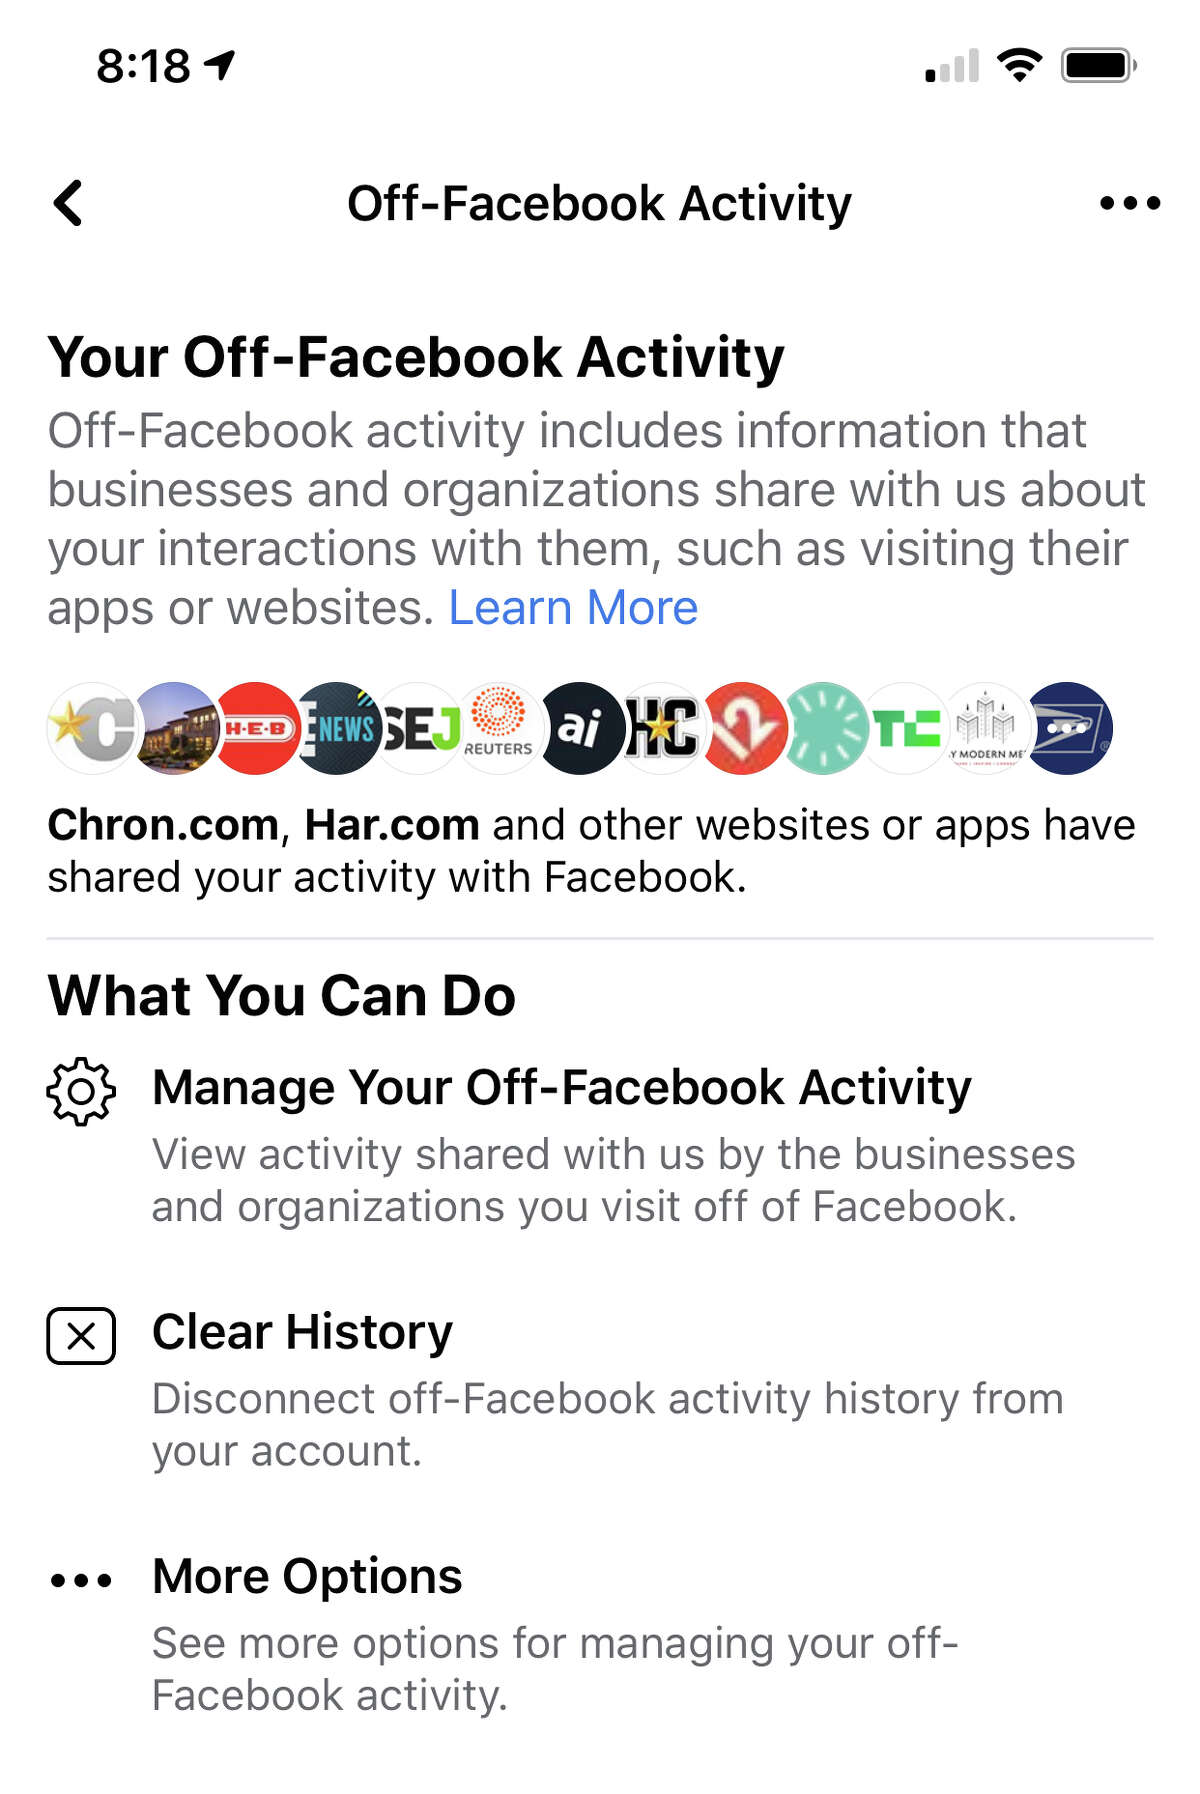 Facebook on Jan. 28, 2020, rolled out new privacy controls that let its users manage data from off Facebook.